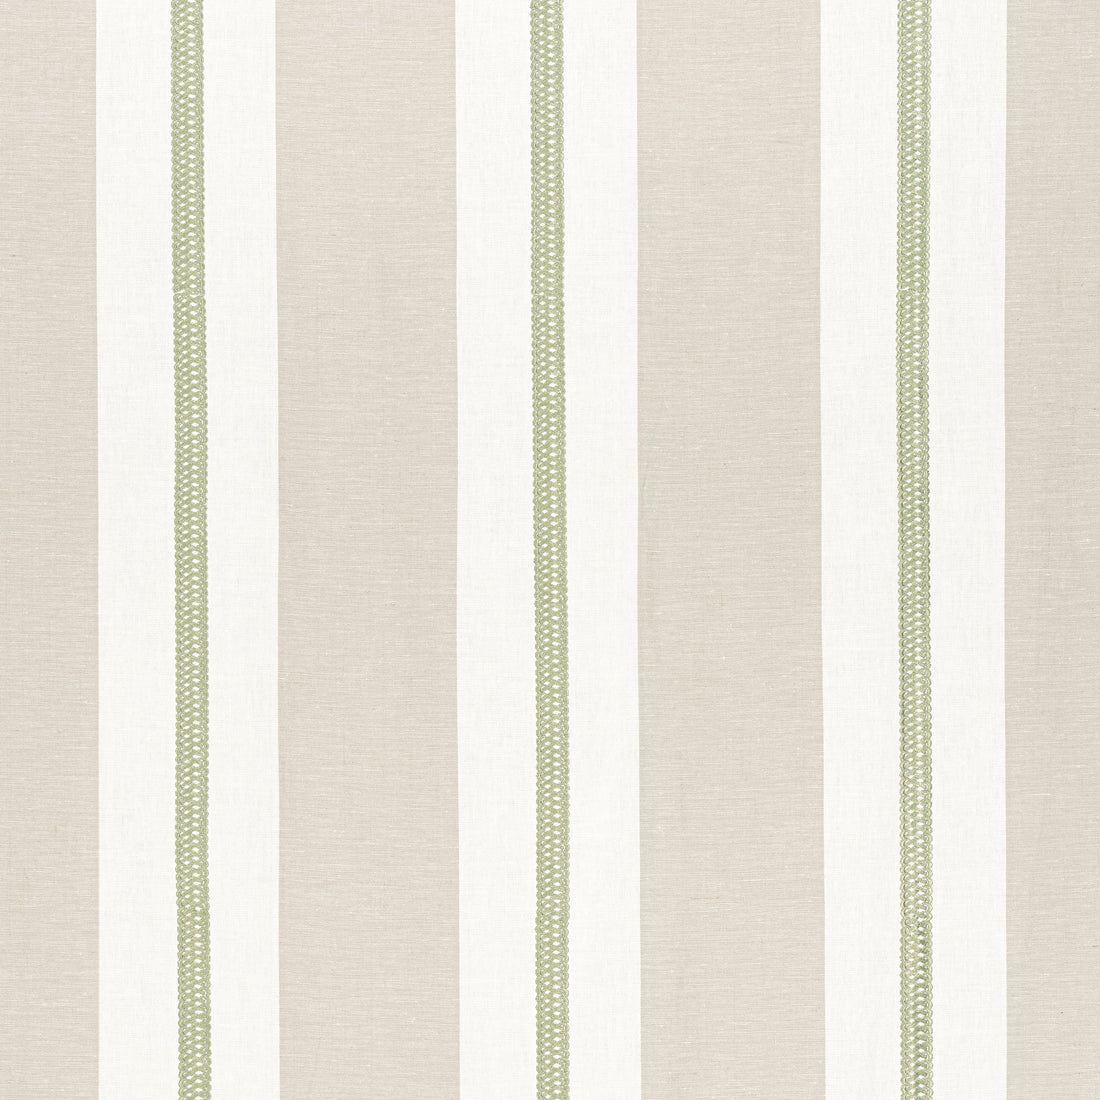 Alden Stripe Embroidery fabric in Sage color - pattern number AW24532 - by Anna French in the Devon collection